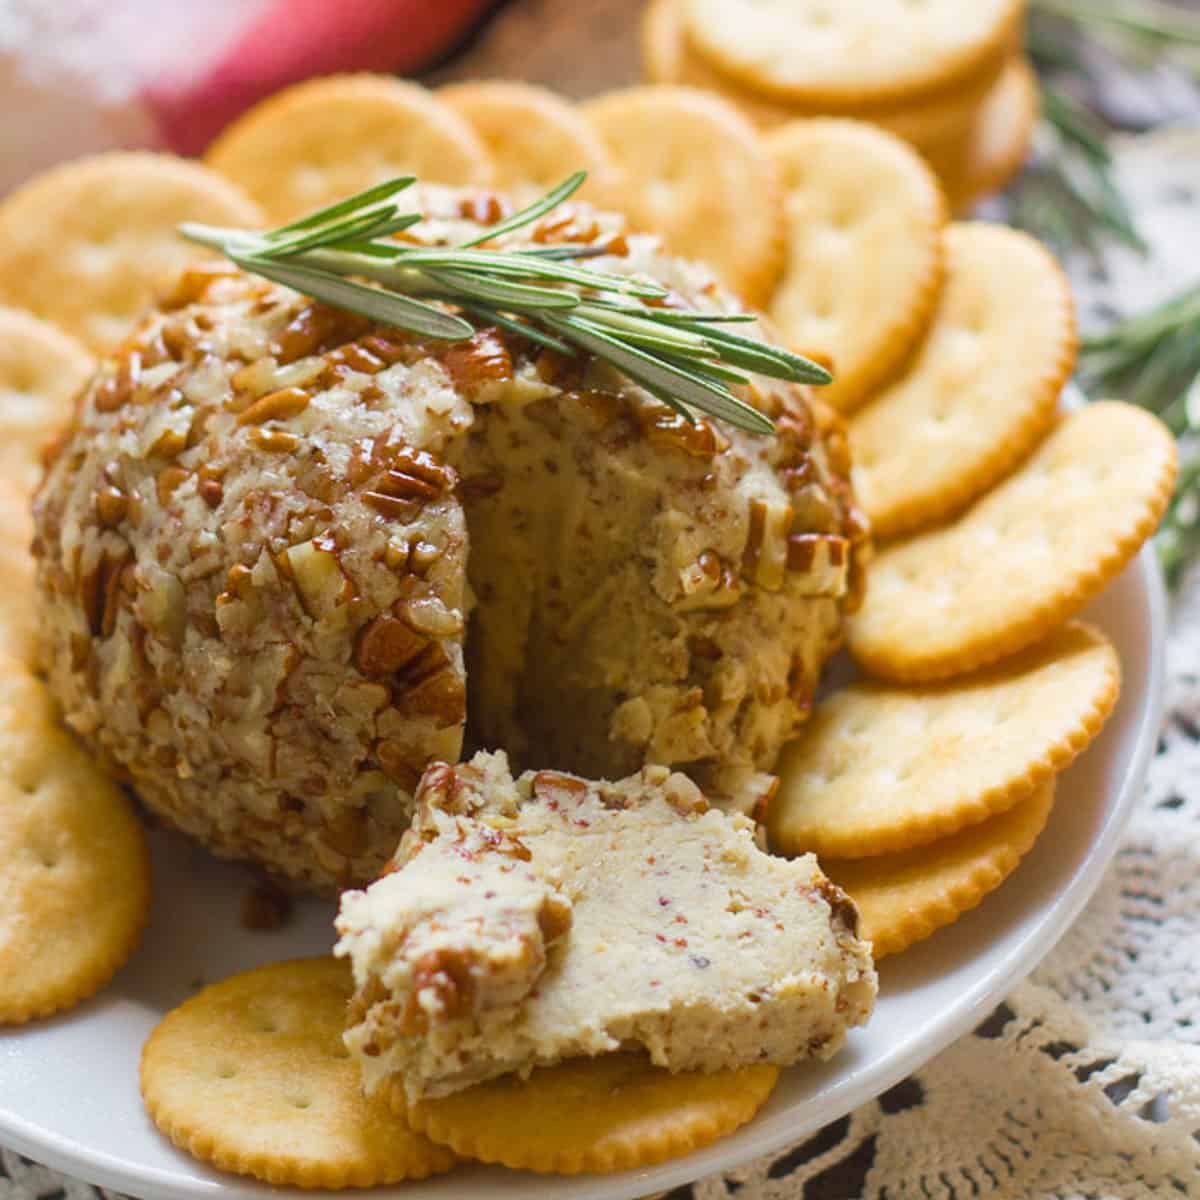 Vegan Cheese Ball with a Slice Cut out and Spread on a Cracker in the Foreground.